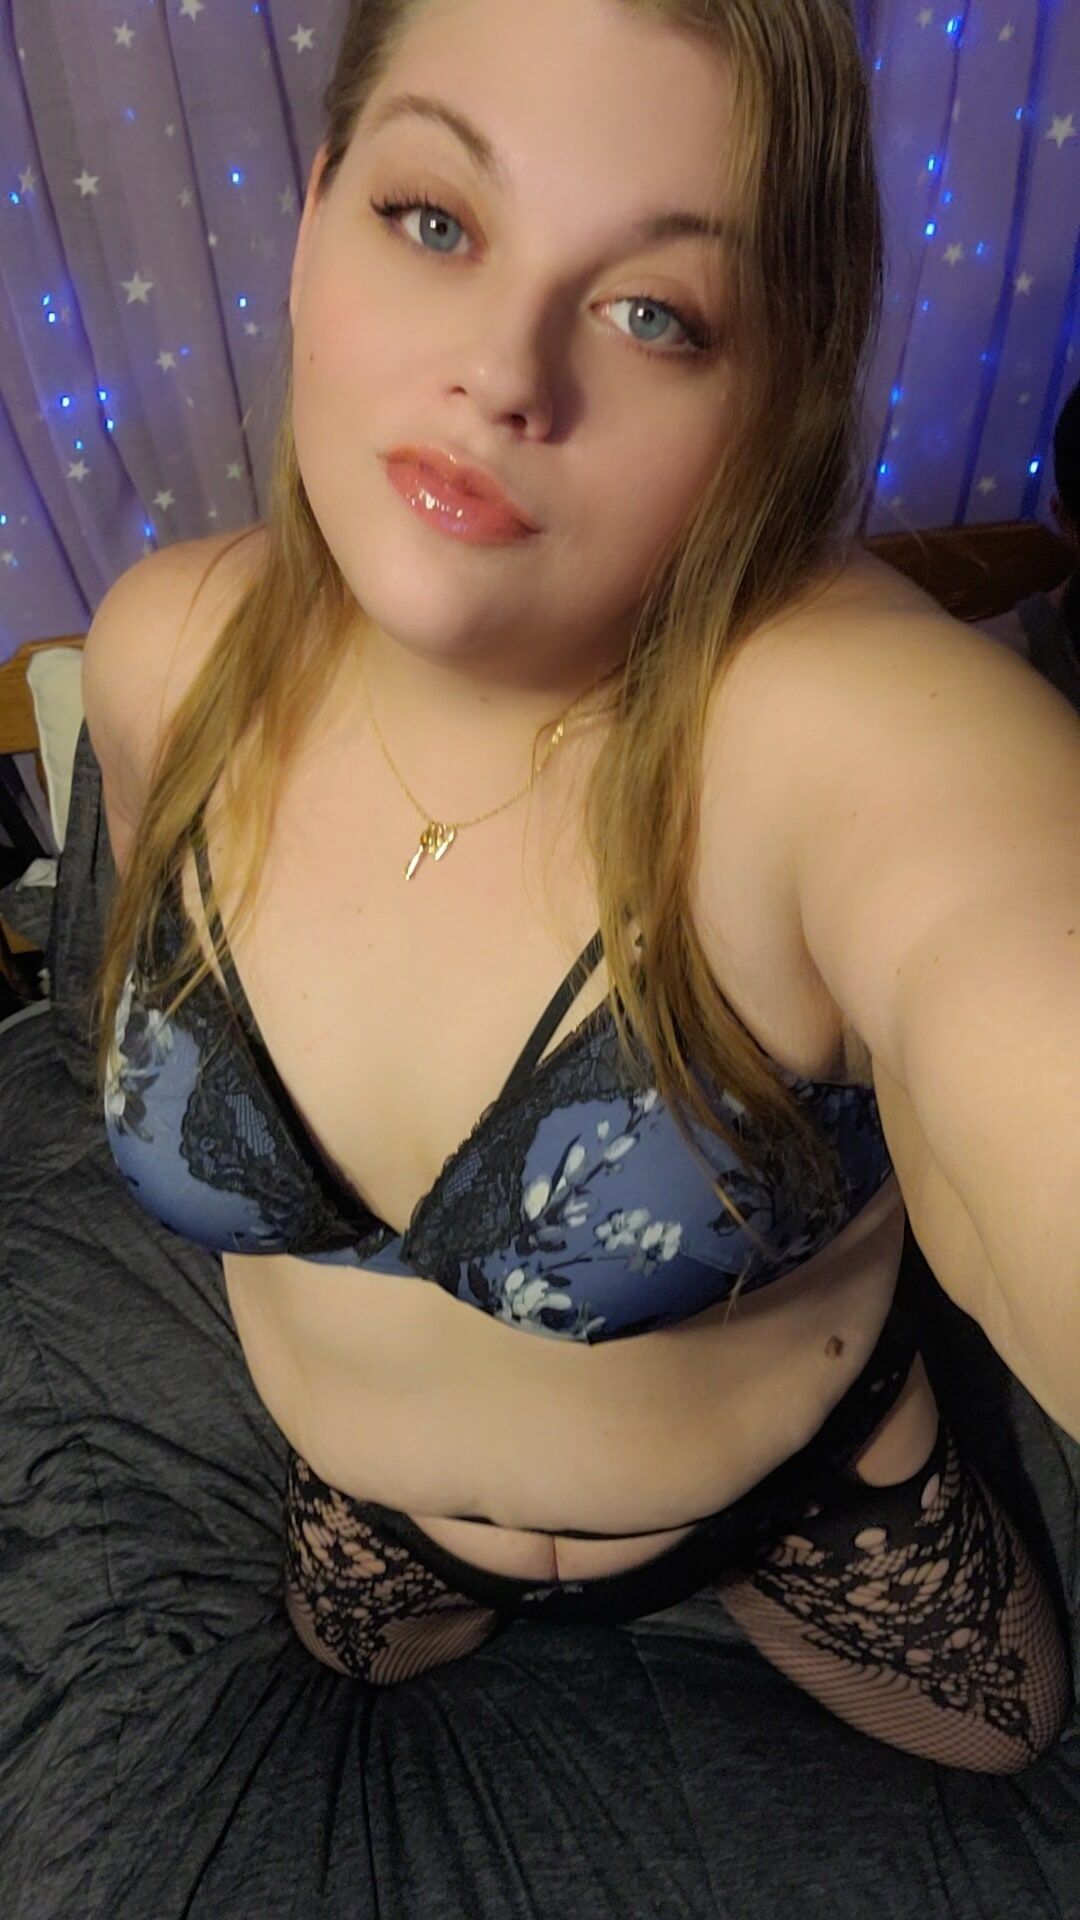 Bbw playing in sexy blue lingerie and fishnets #19